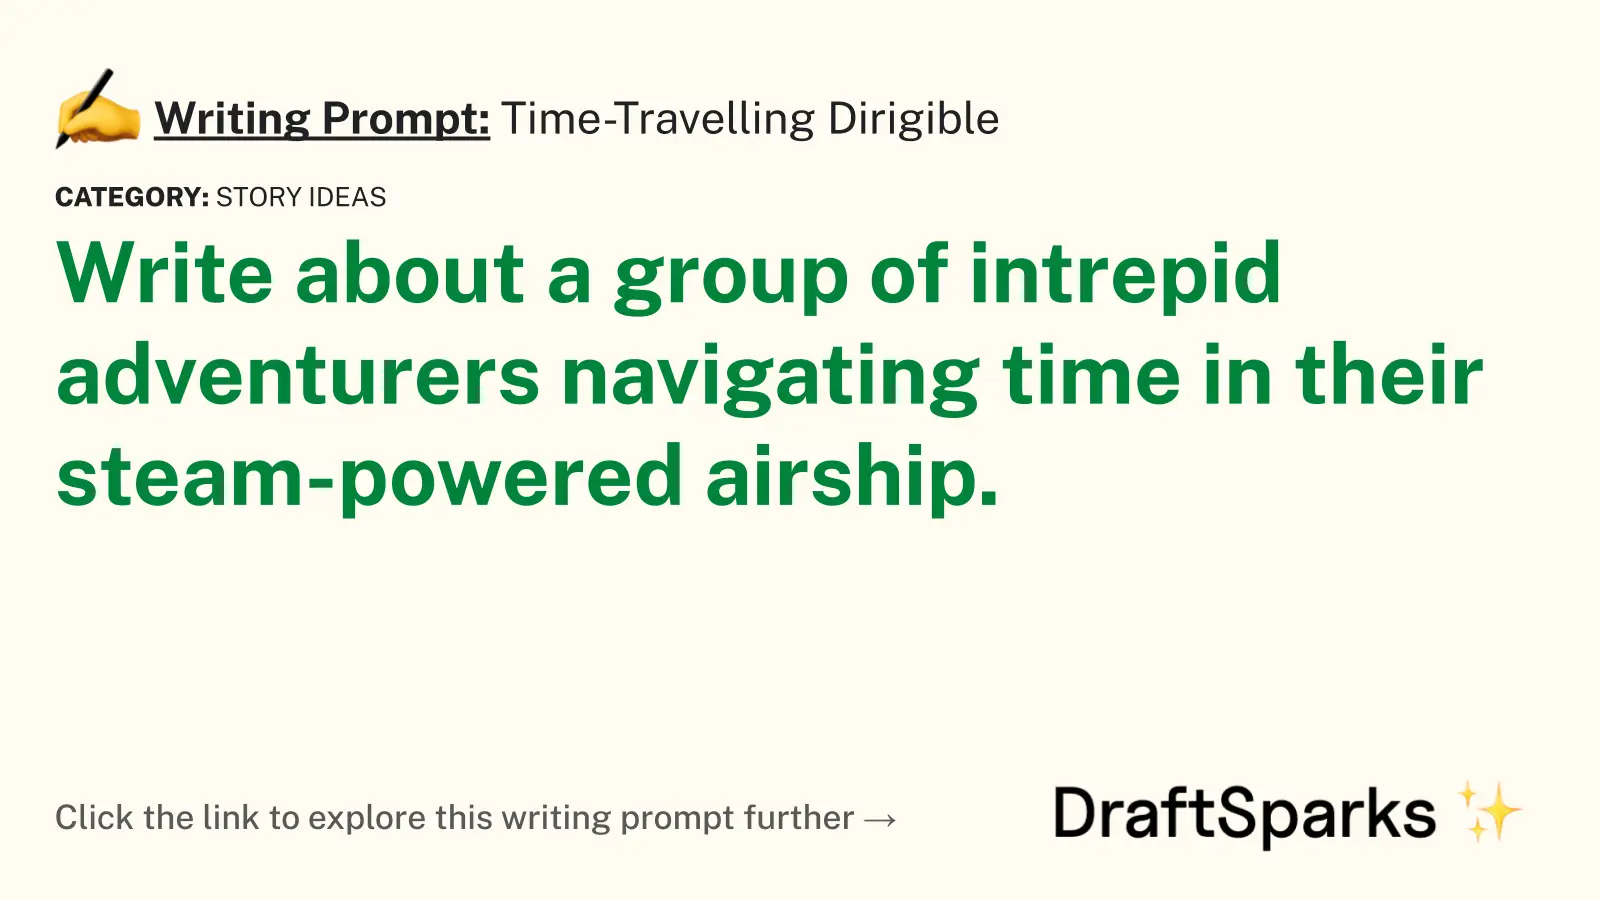 Time-Travelling Dirigible